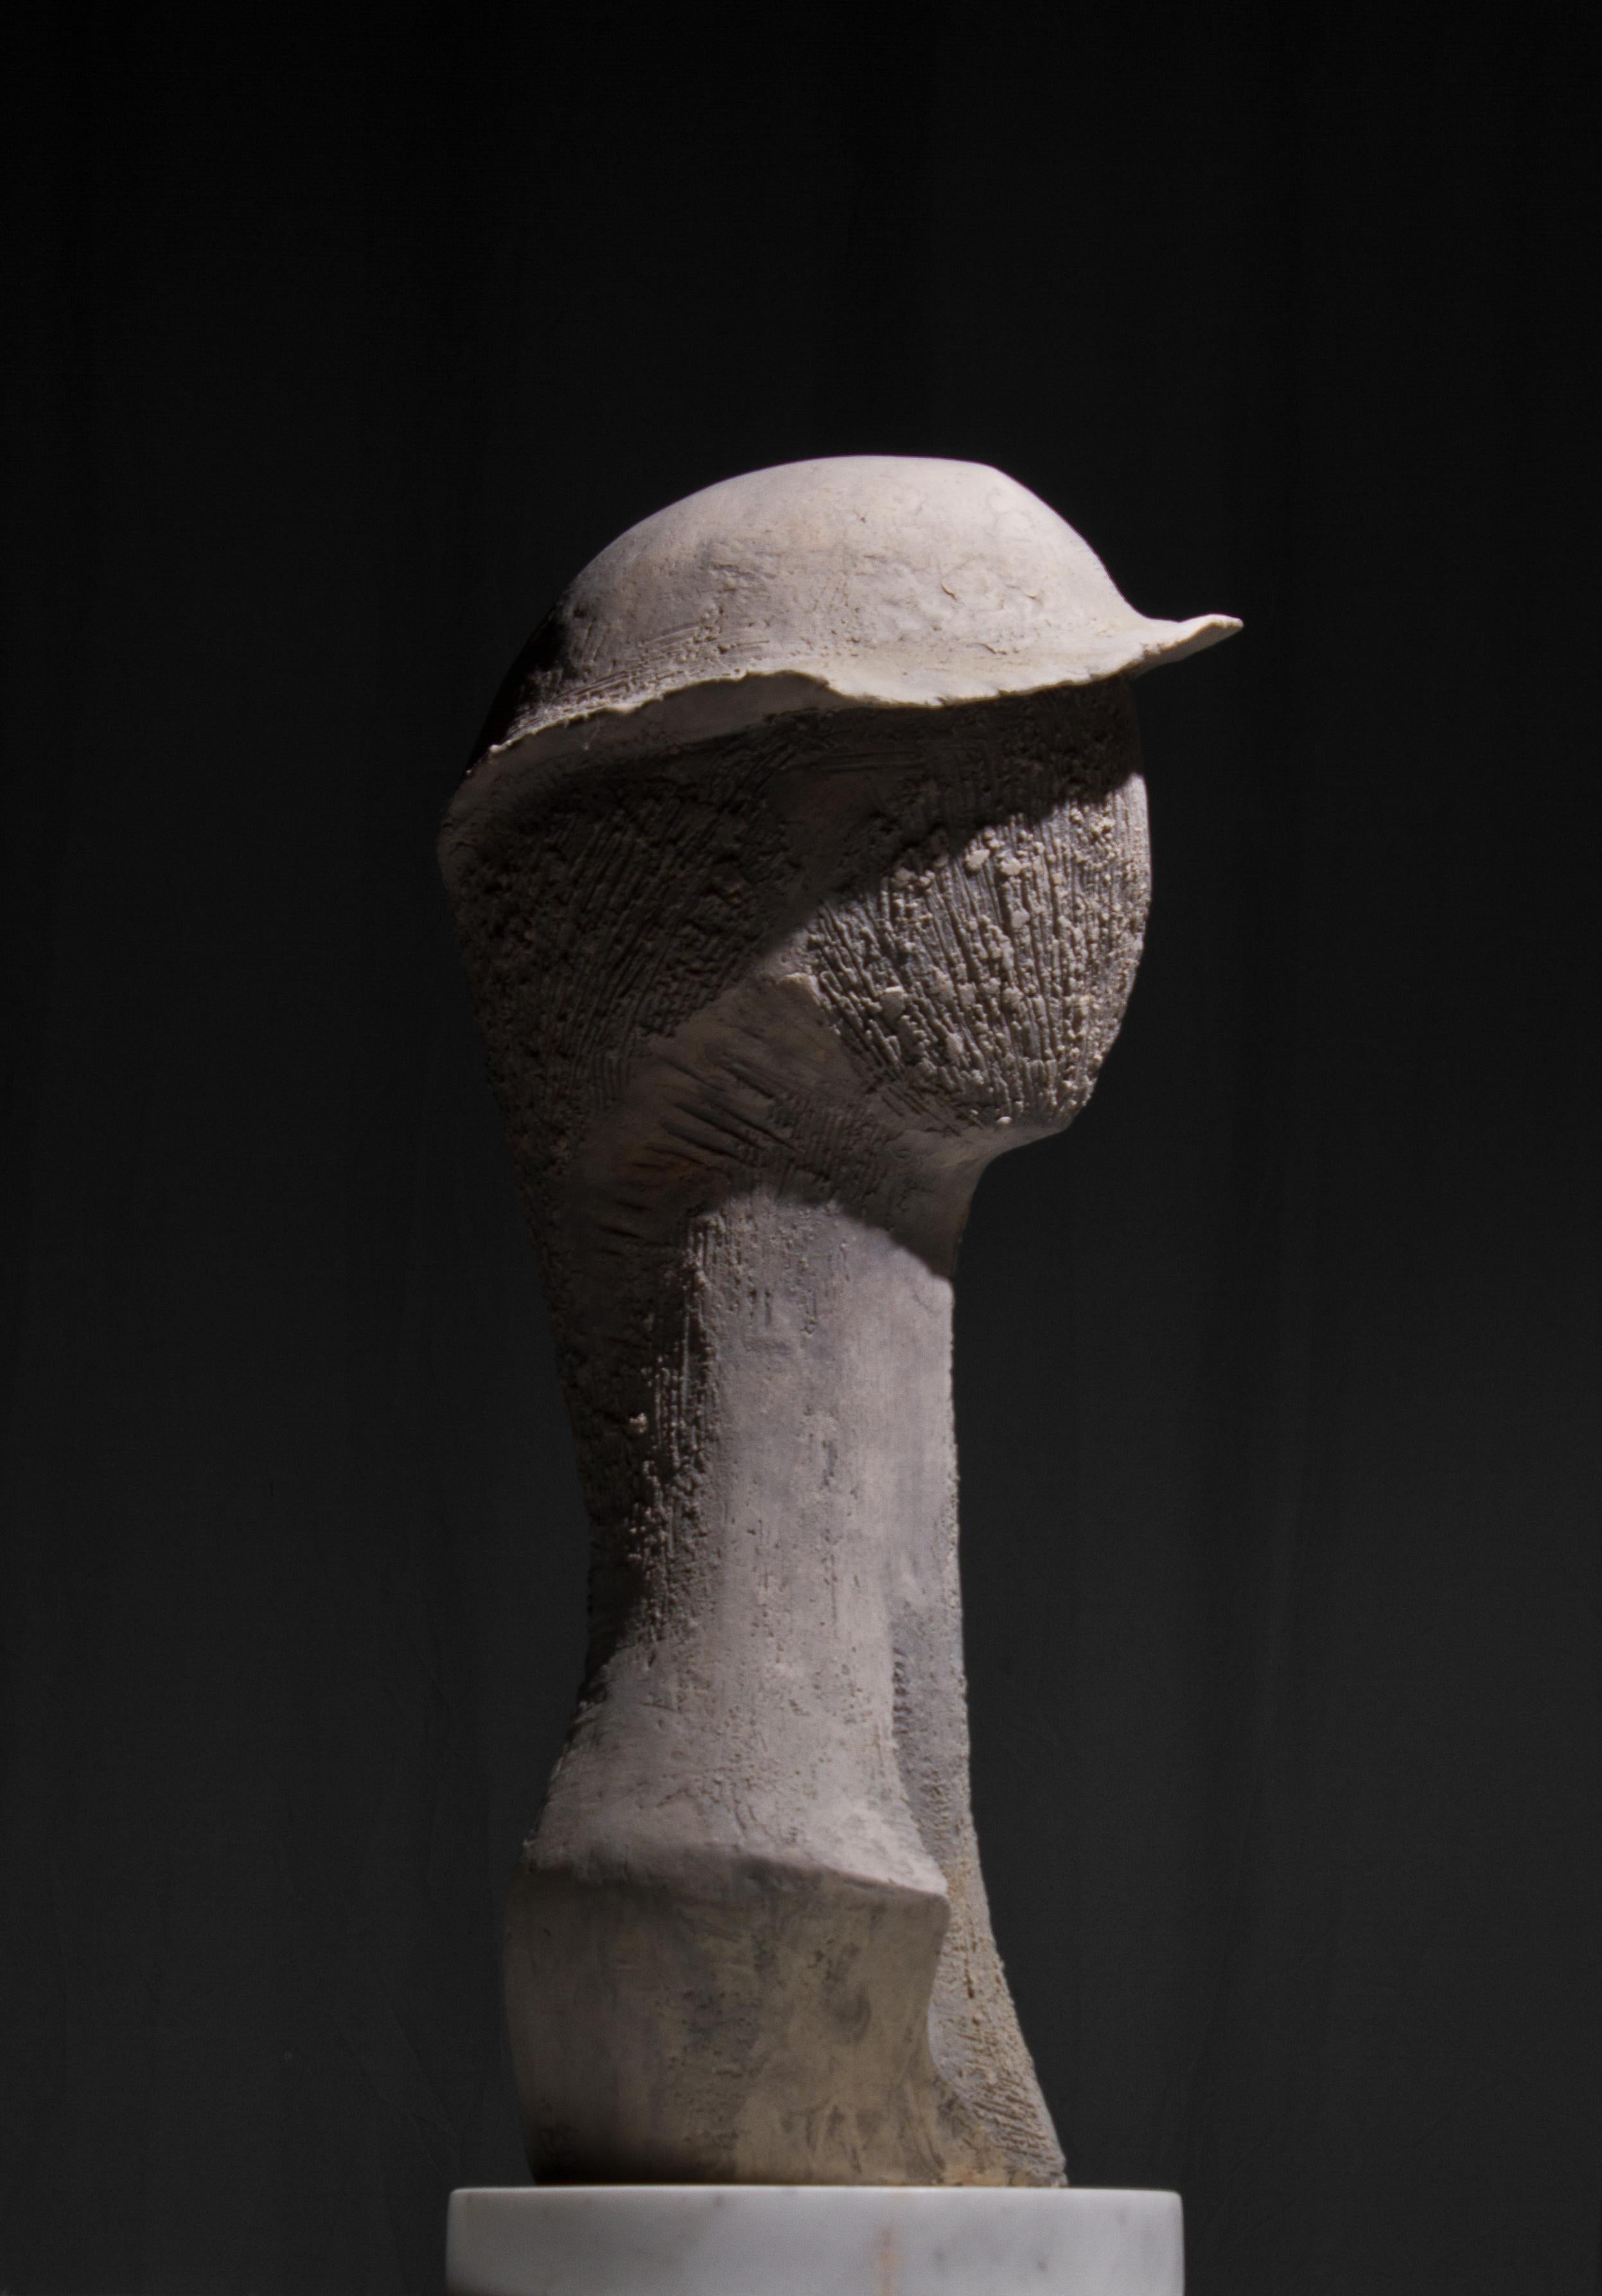 Ceramic abstract face with hat
8.5 x 19.6 x 8.0, 2.2 lbs 
Ceramic
Hand signed by artist 

Artist's Commentary: 
